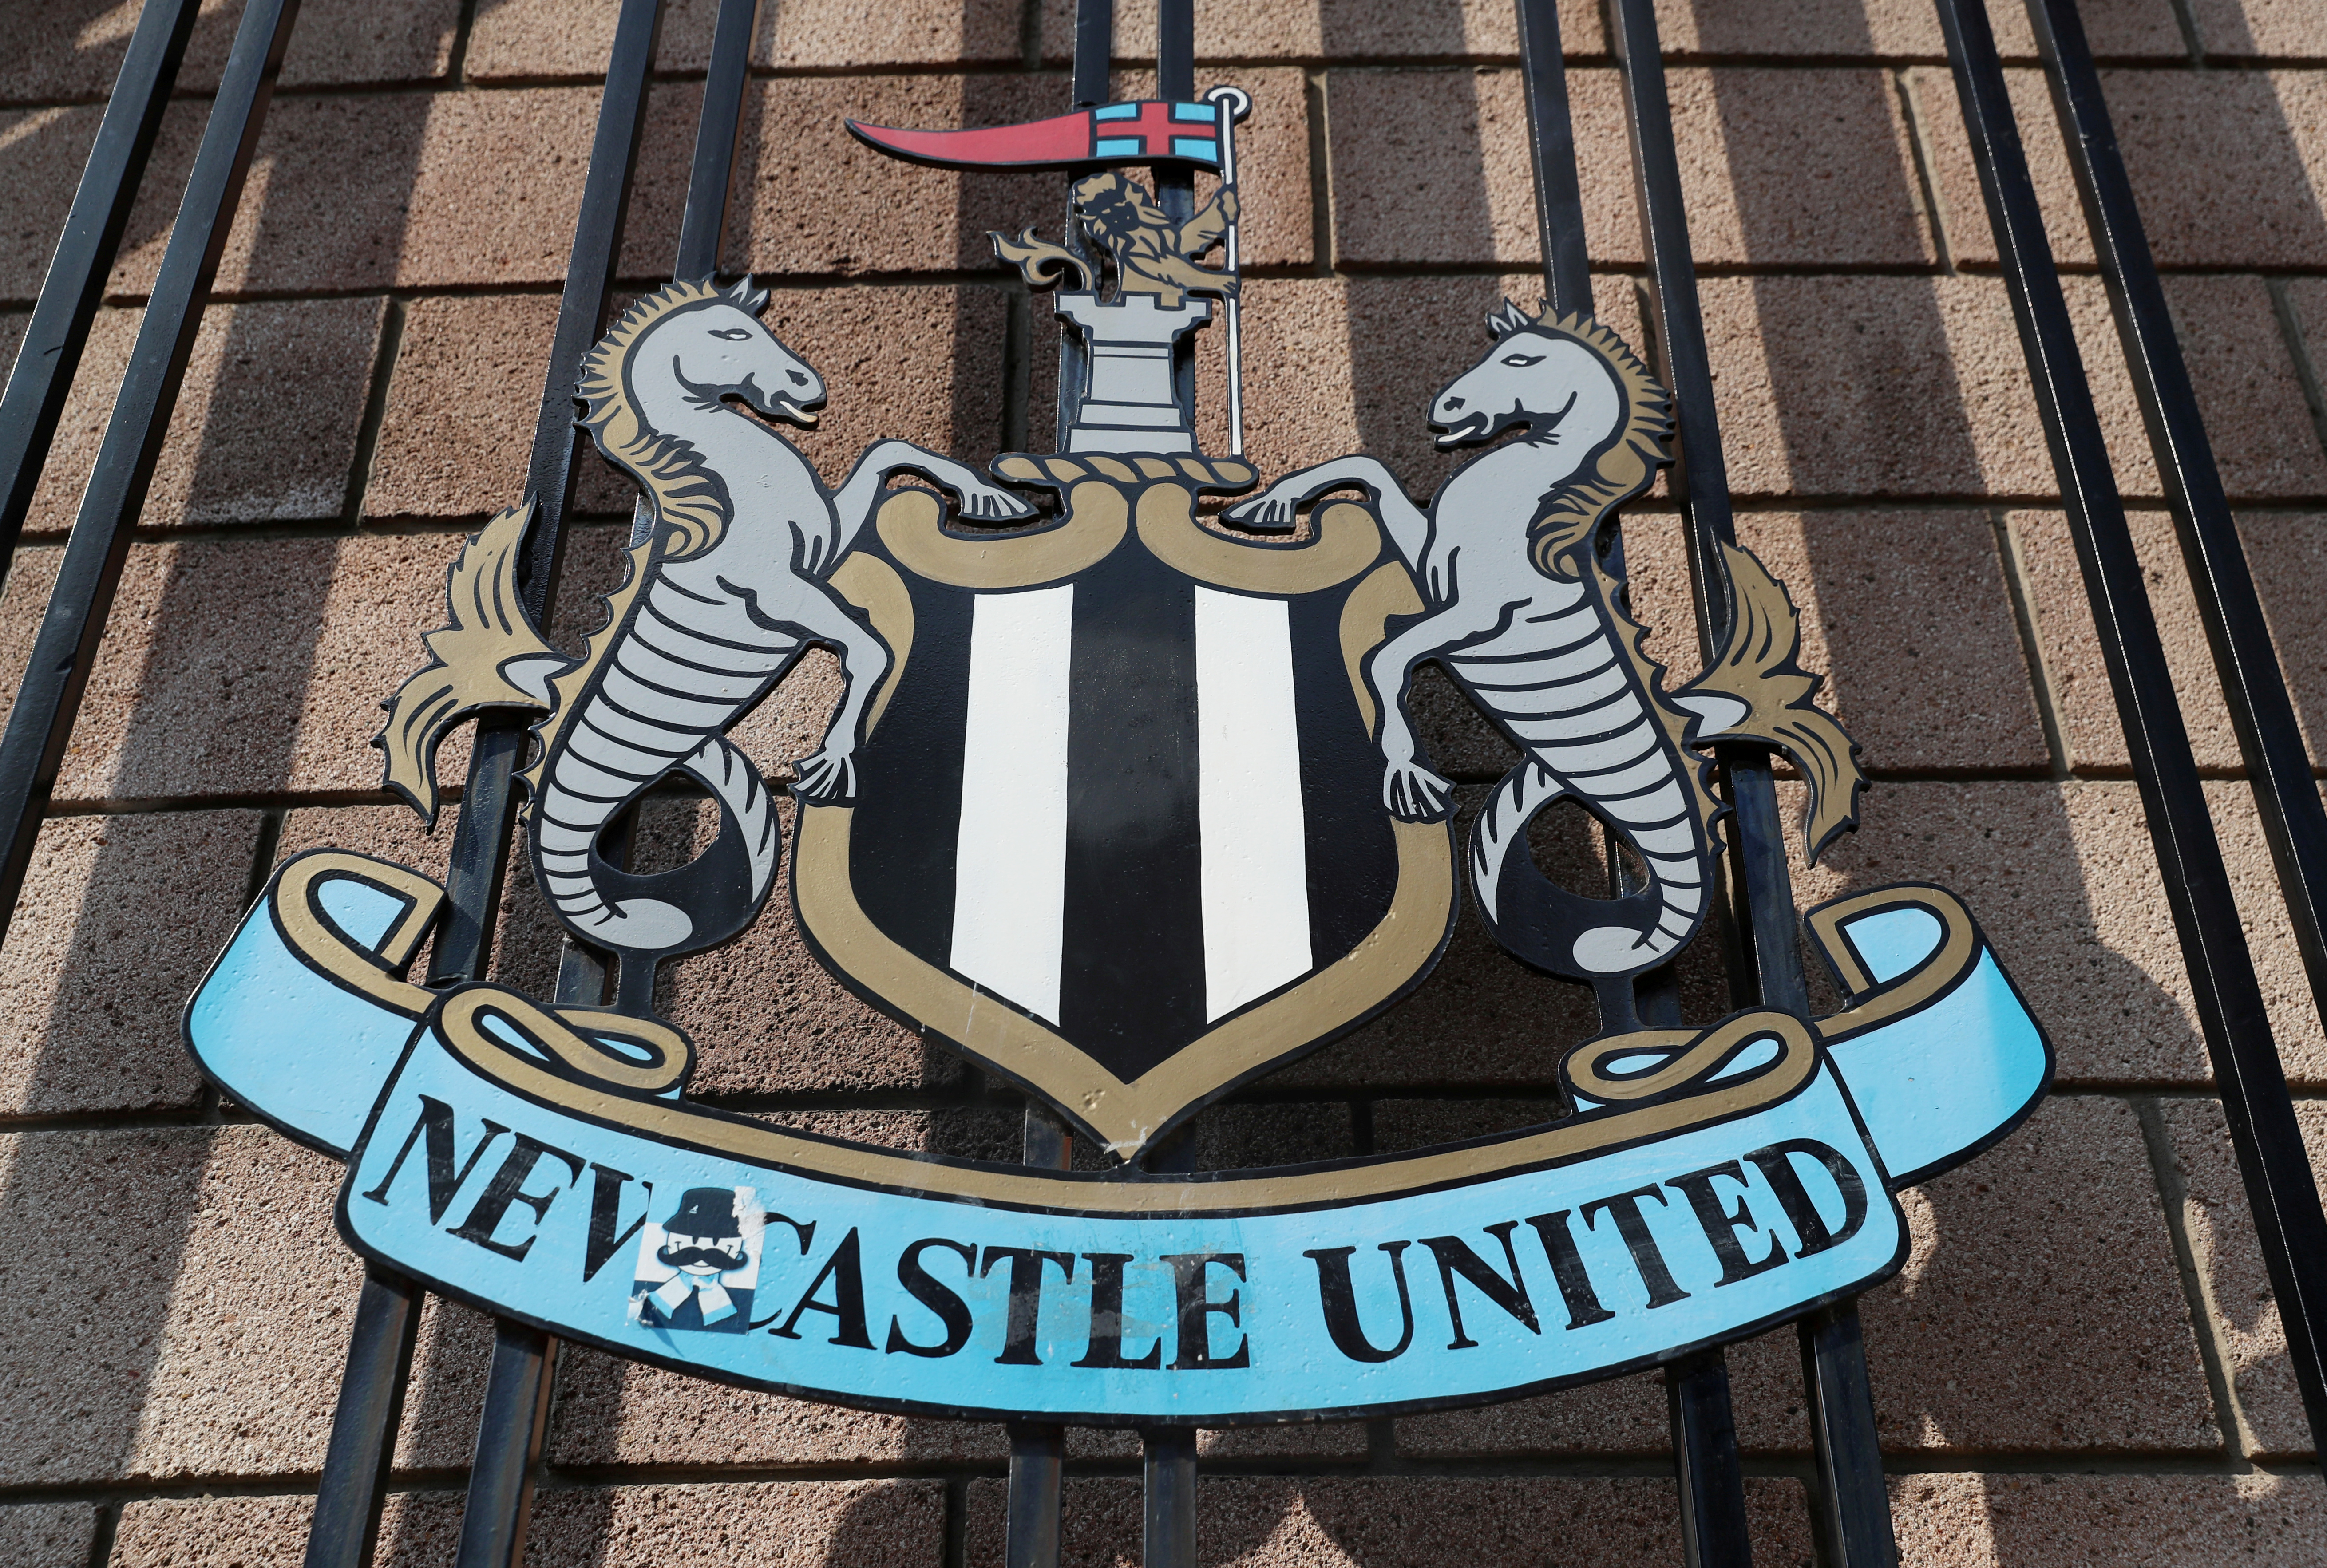 Exclusive: Photoshopping Obama - the company that wants to buy Newcastle United